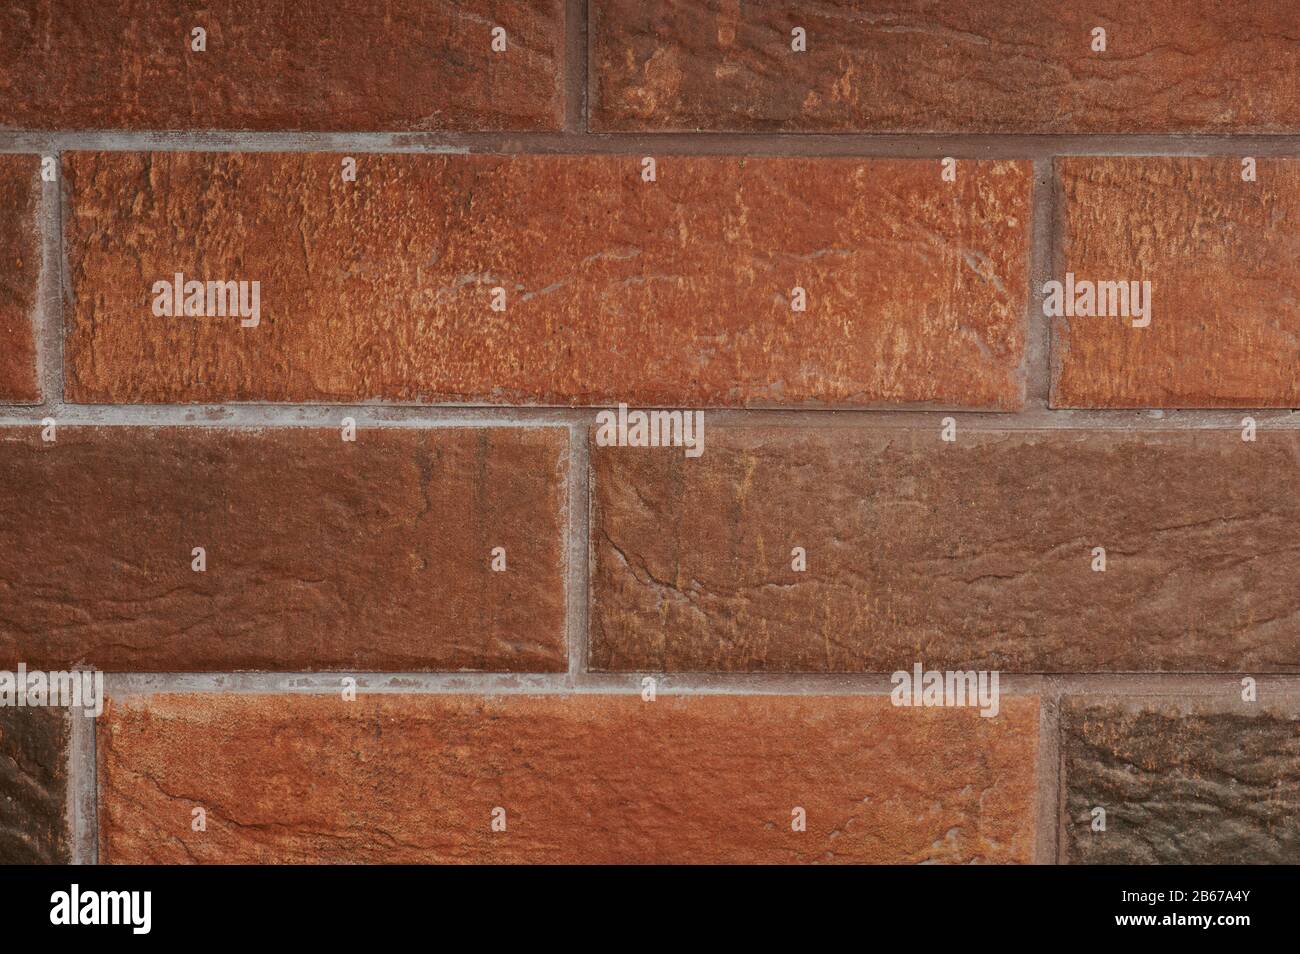 Red brick wall background close up view. Red block tiles Stock Photo